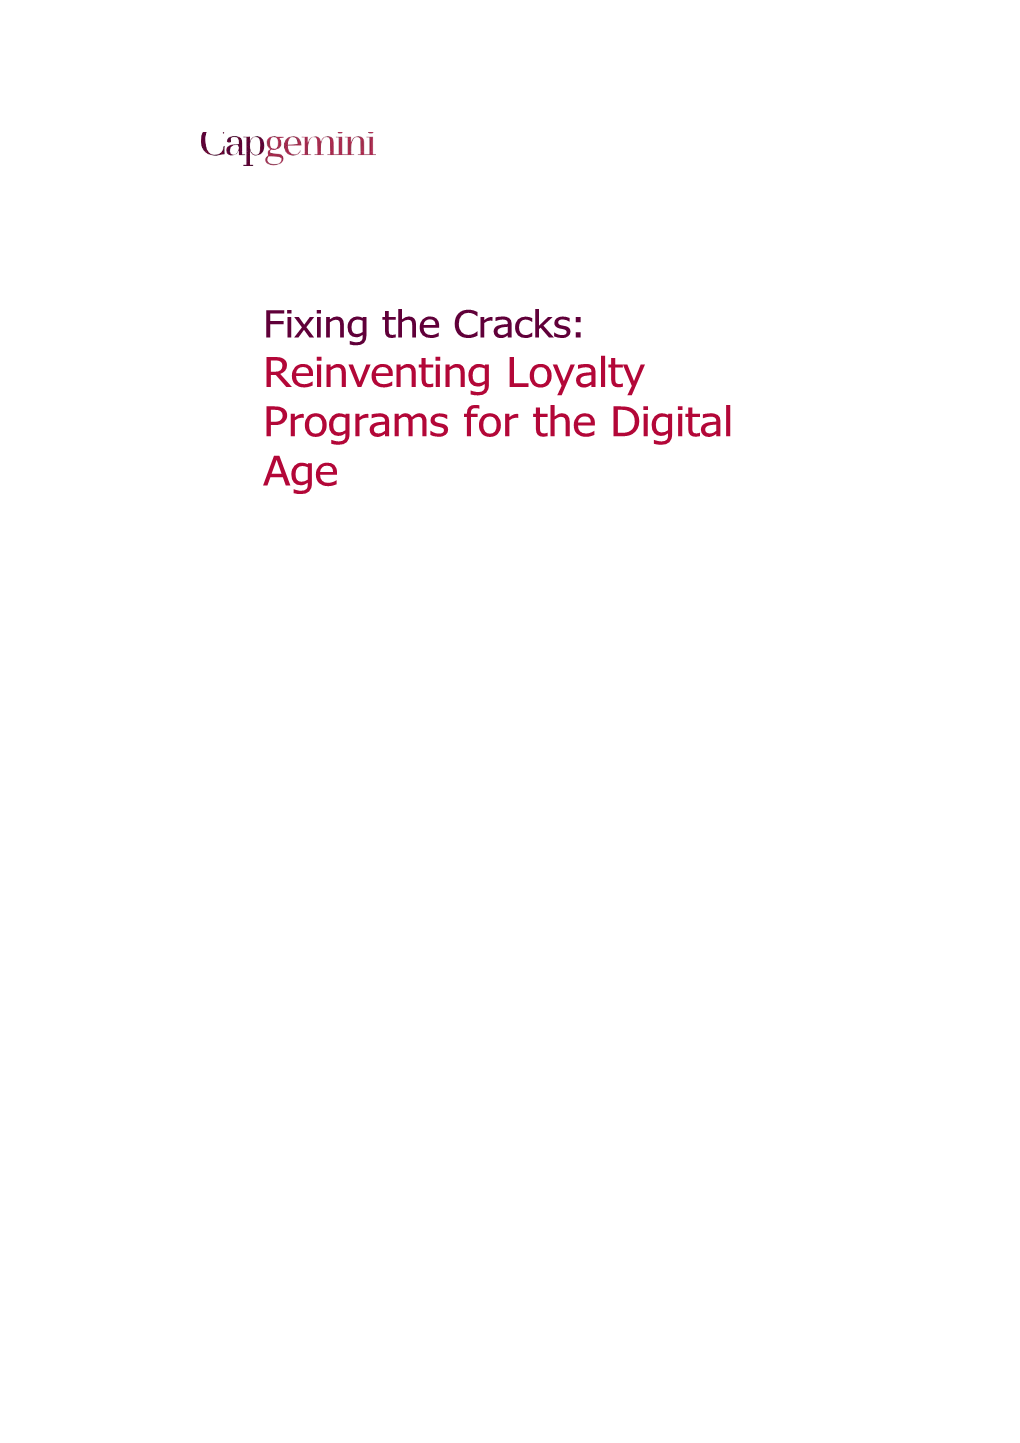 Fixing the Cracks: Reinventing Loyalty Programs for the Digital Age